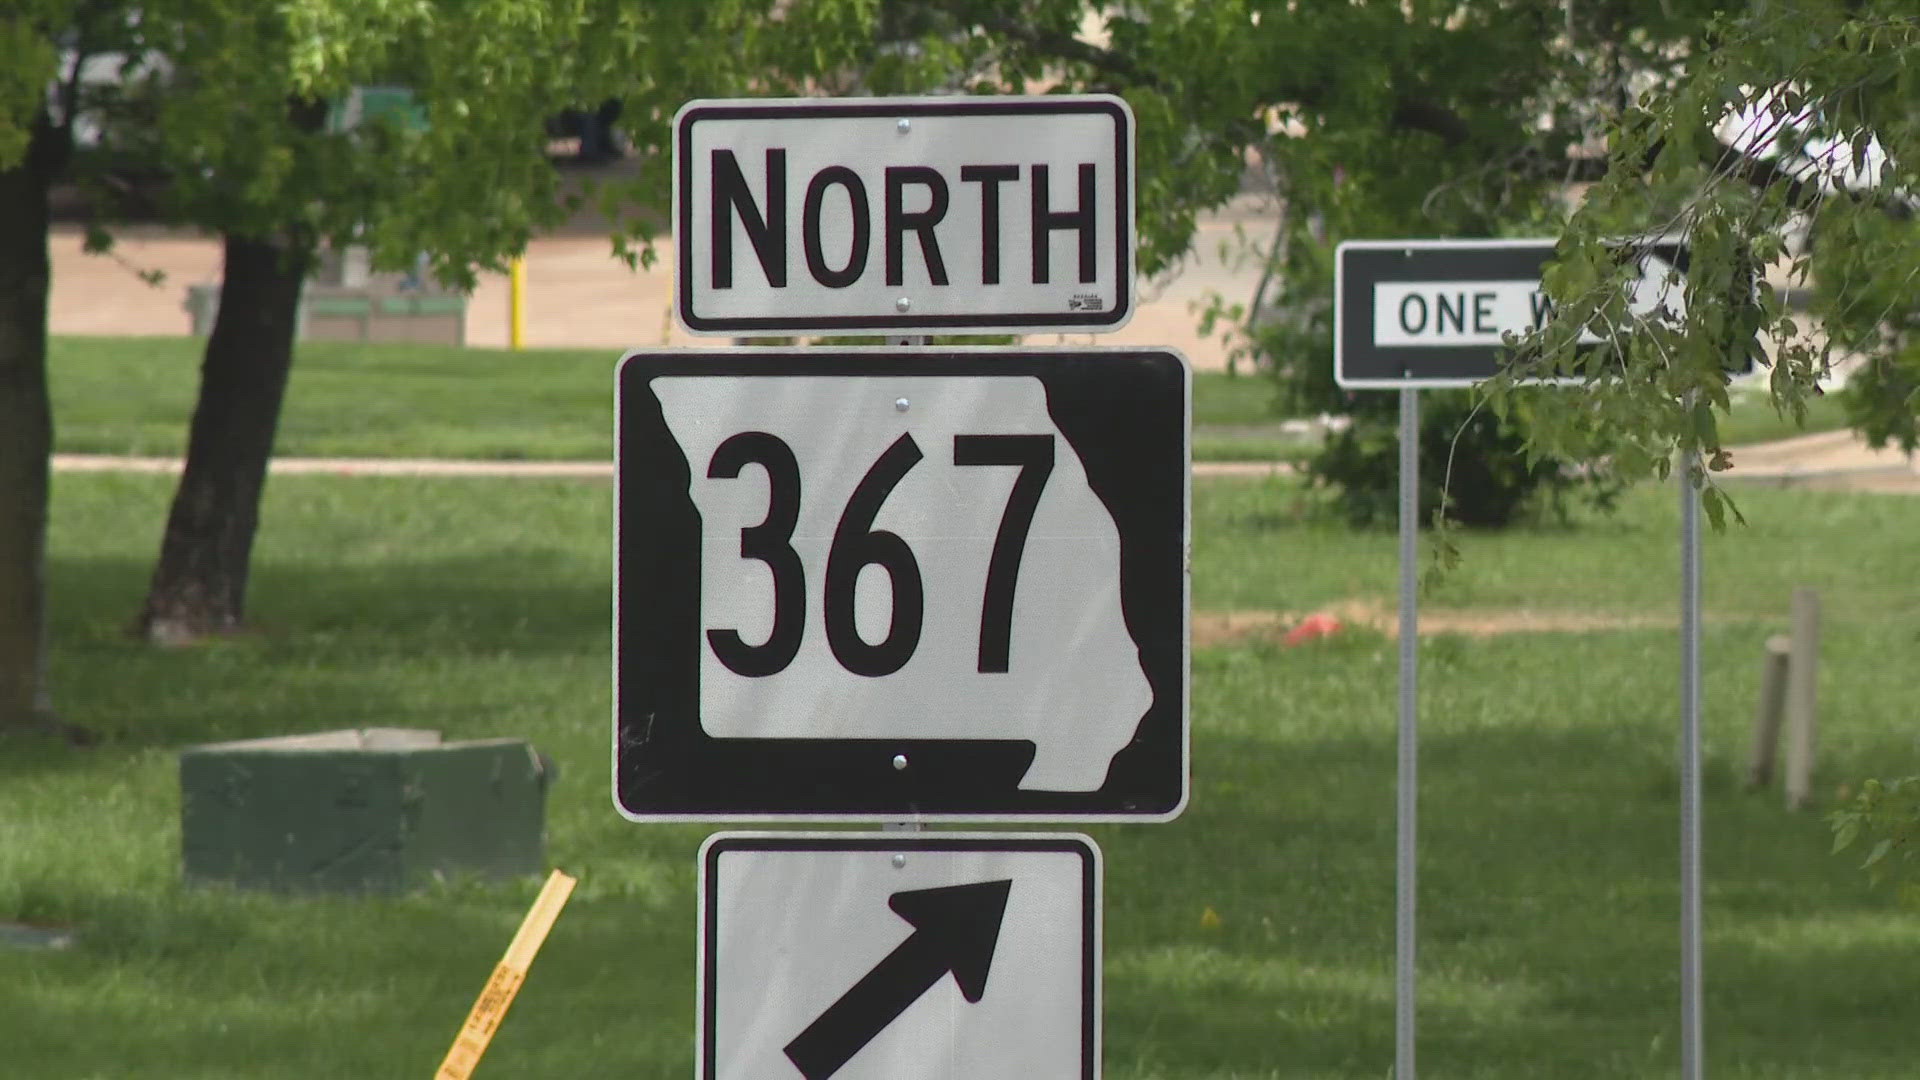 MoDOT is looking for feedback while investigating rising crash patterns and pedestrian incidents near the Route 367 corridor in north St. Louis County.